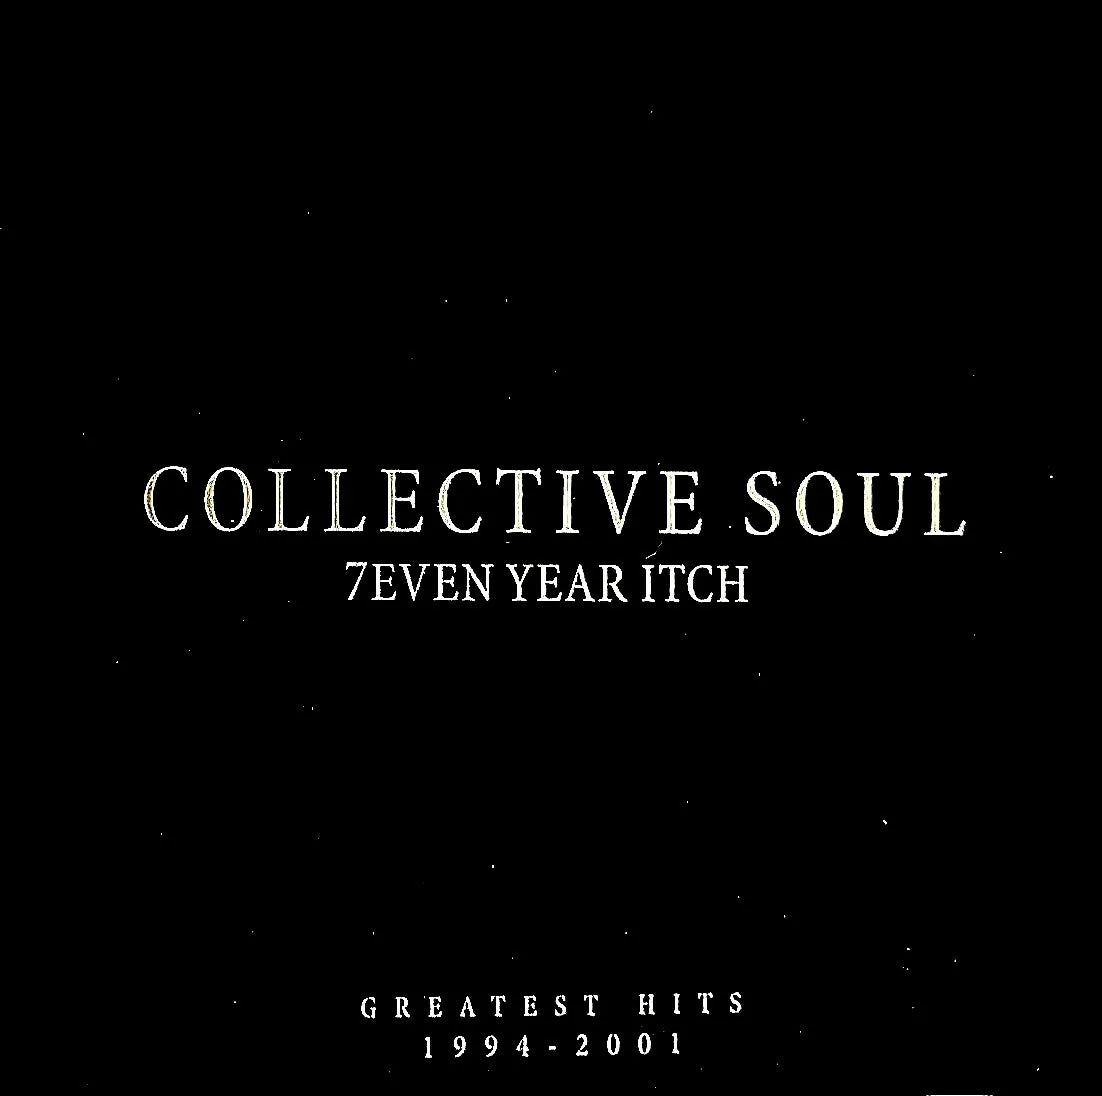 Collective Soul 7even Year Itch: Greatest Hits 1994-2001